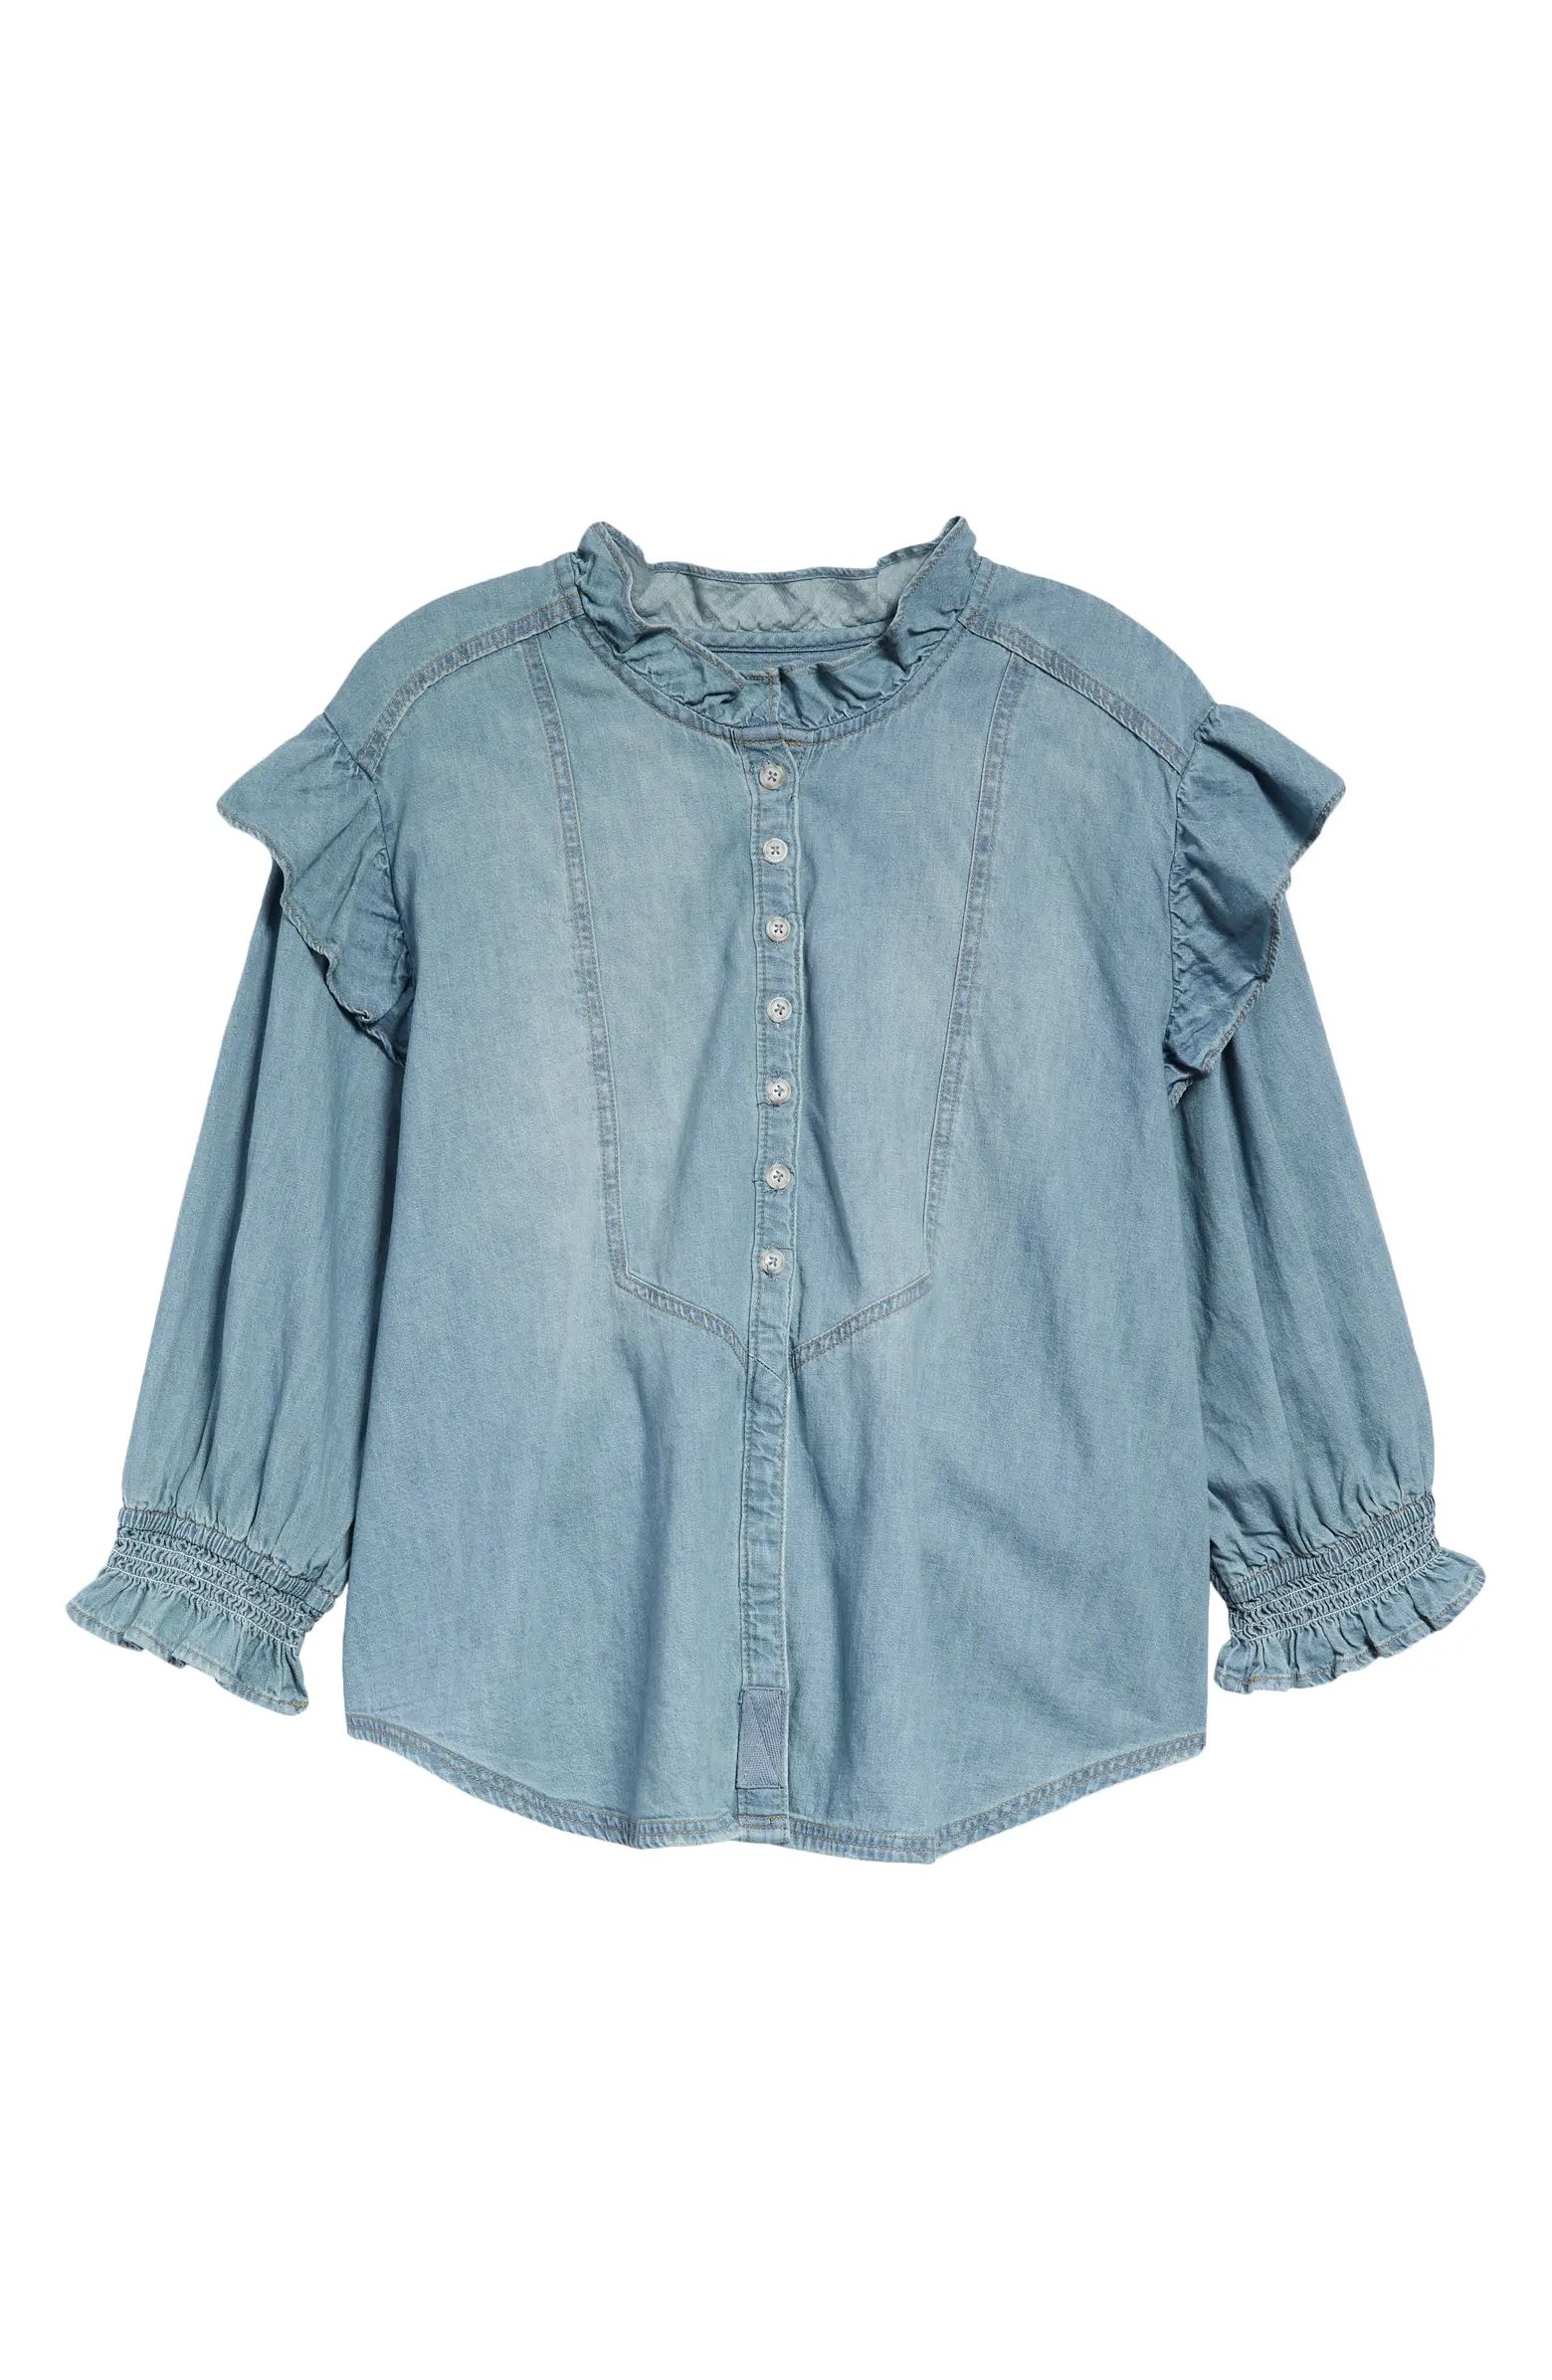 Free People Louise Denim Button-Up Top | Nordstrom | Nordstrom